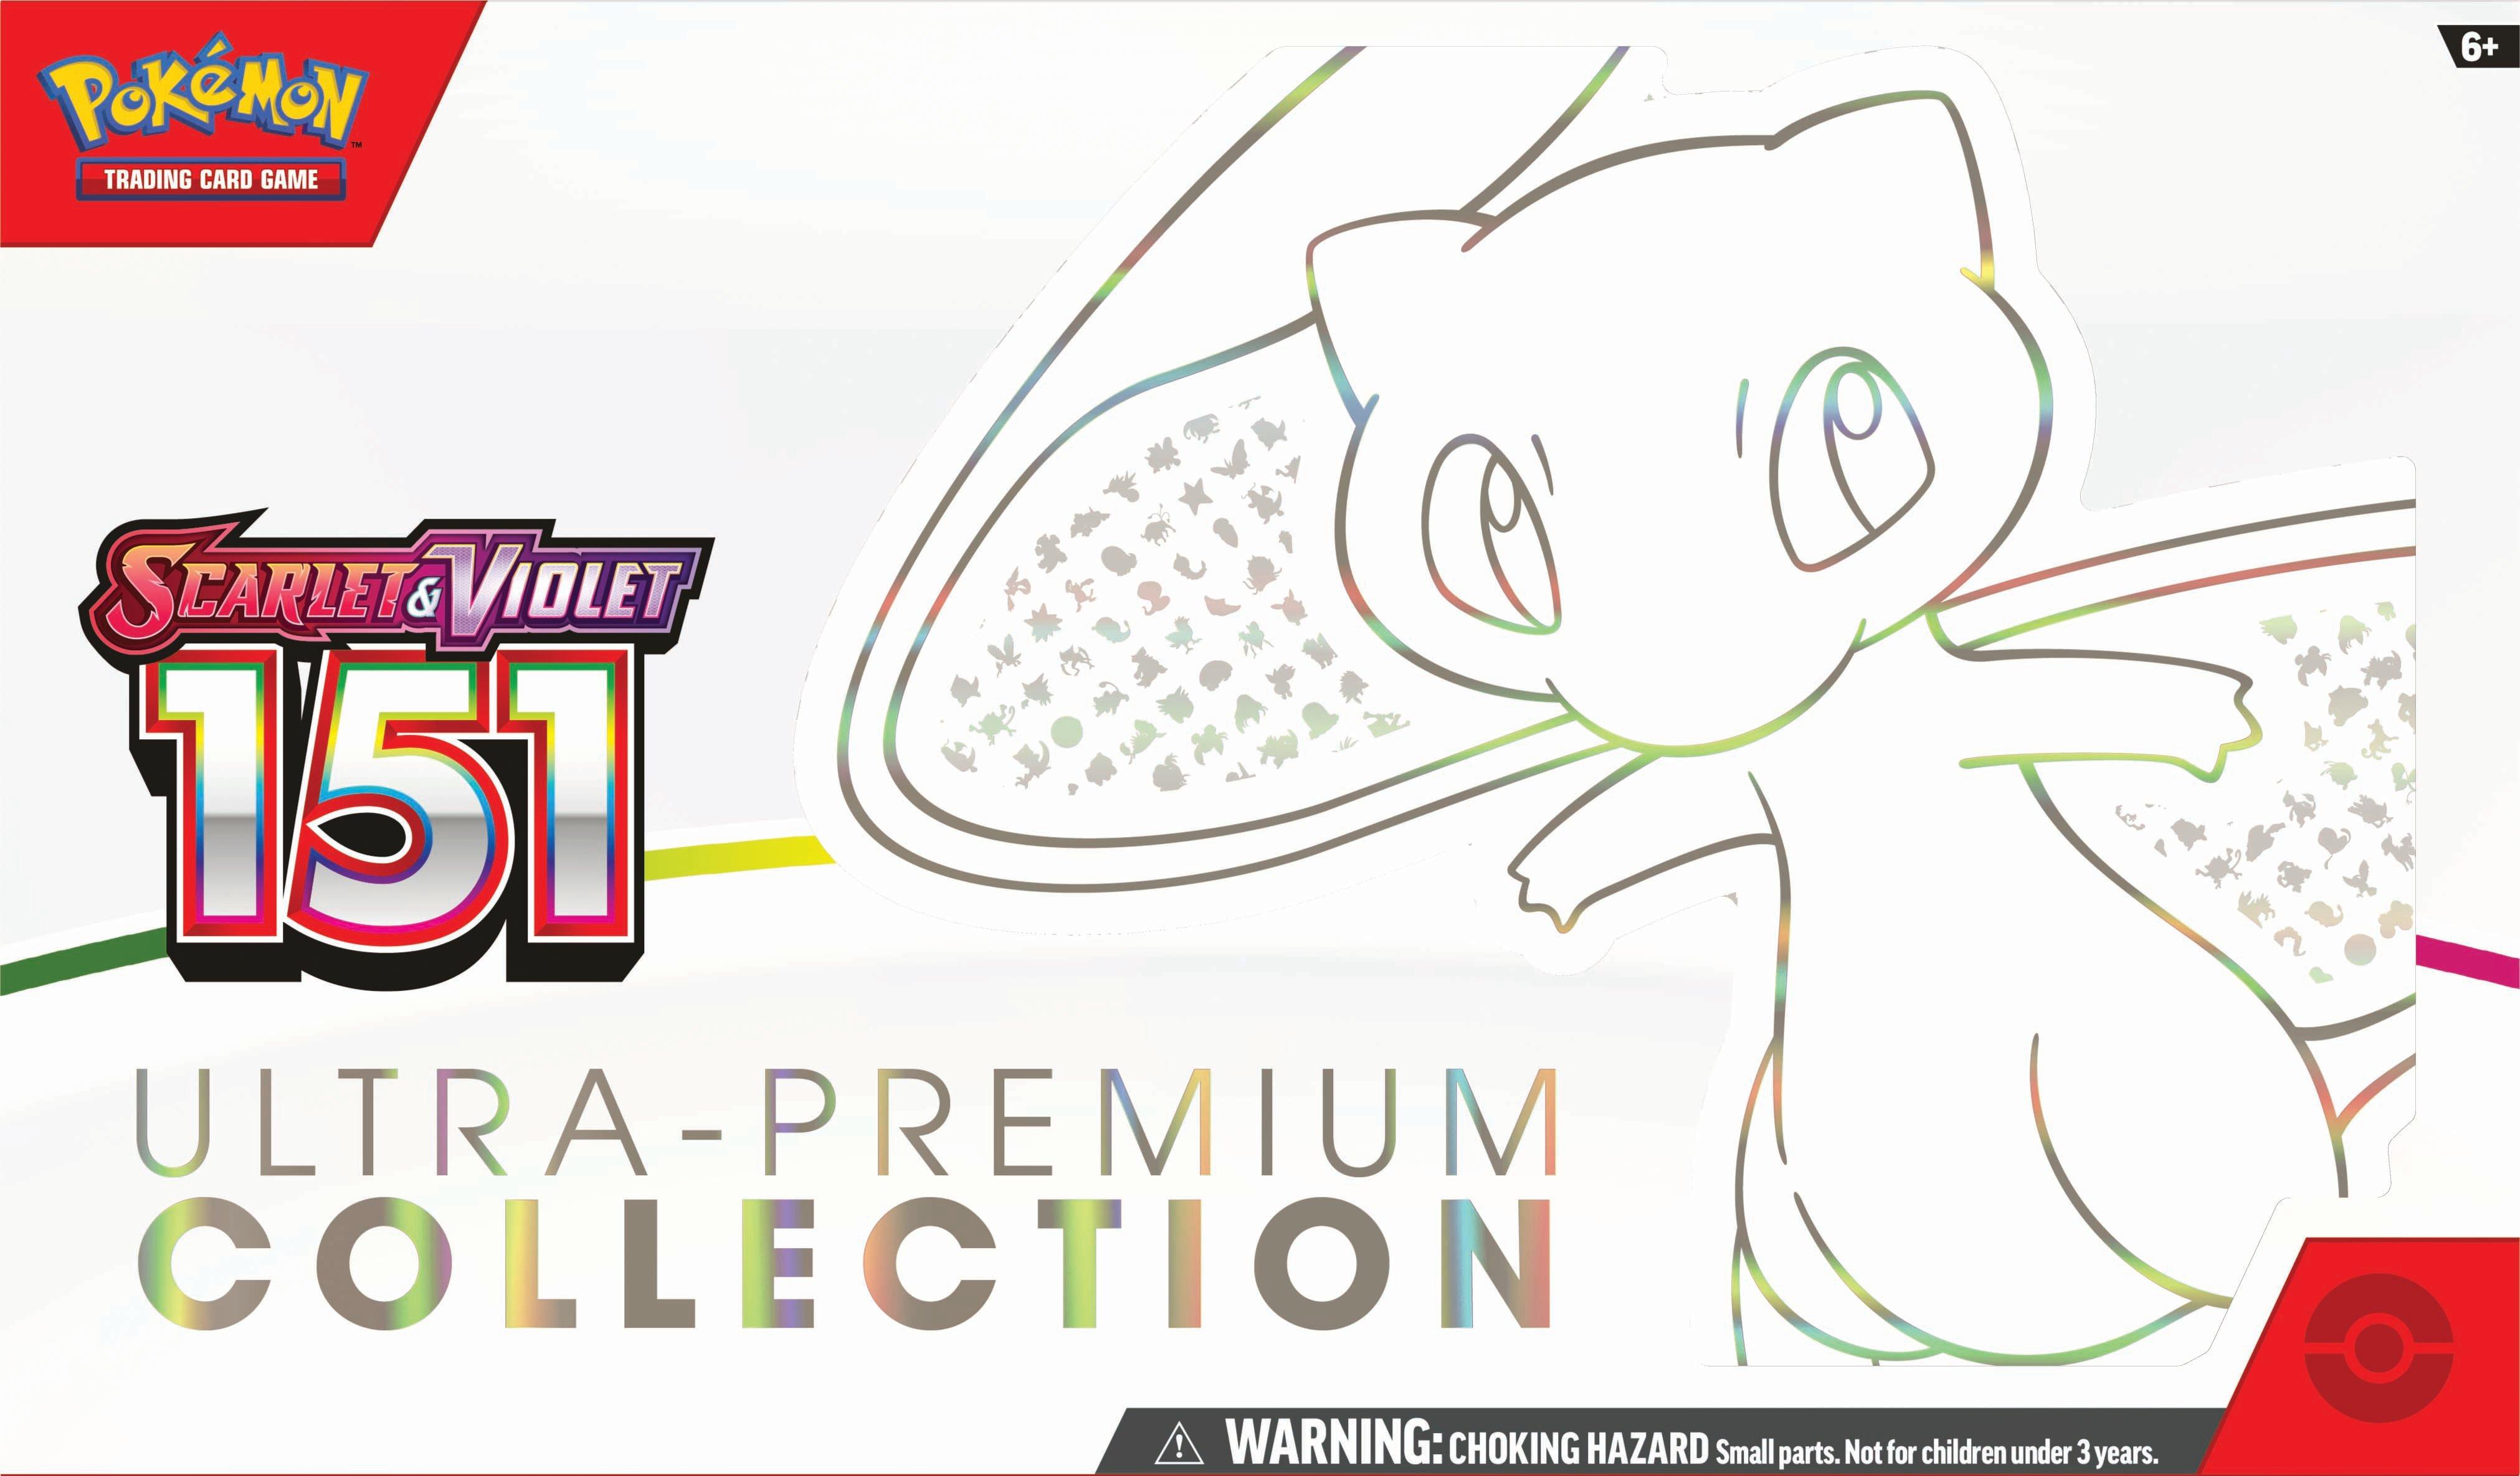 Pokemon Trading Card Game: Scarlet and Violet 151 Collection Ultra-Premium Collection